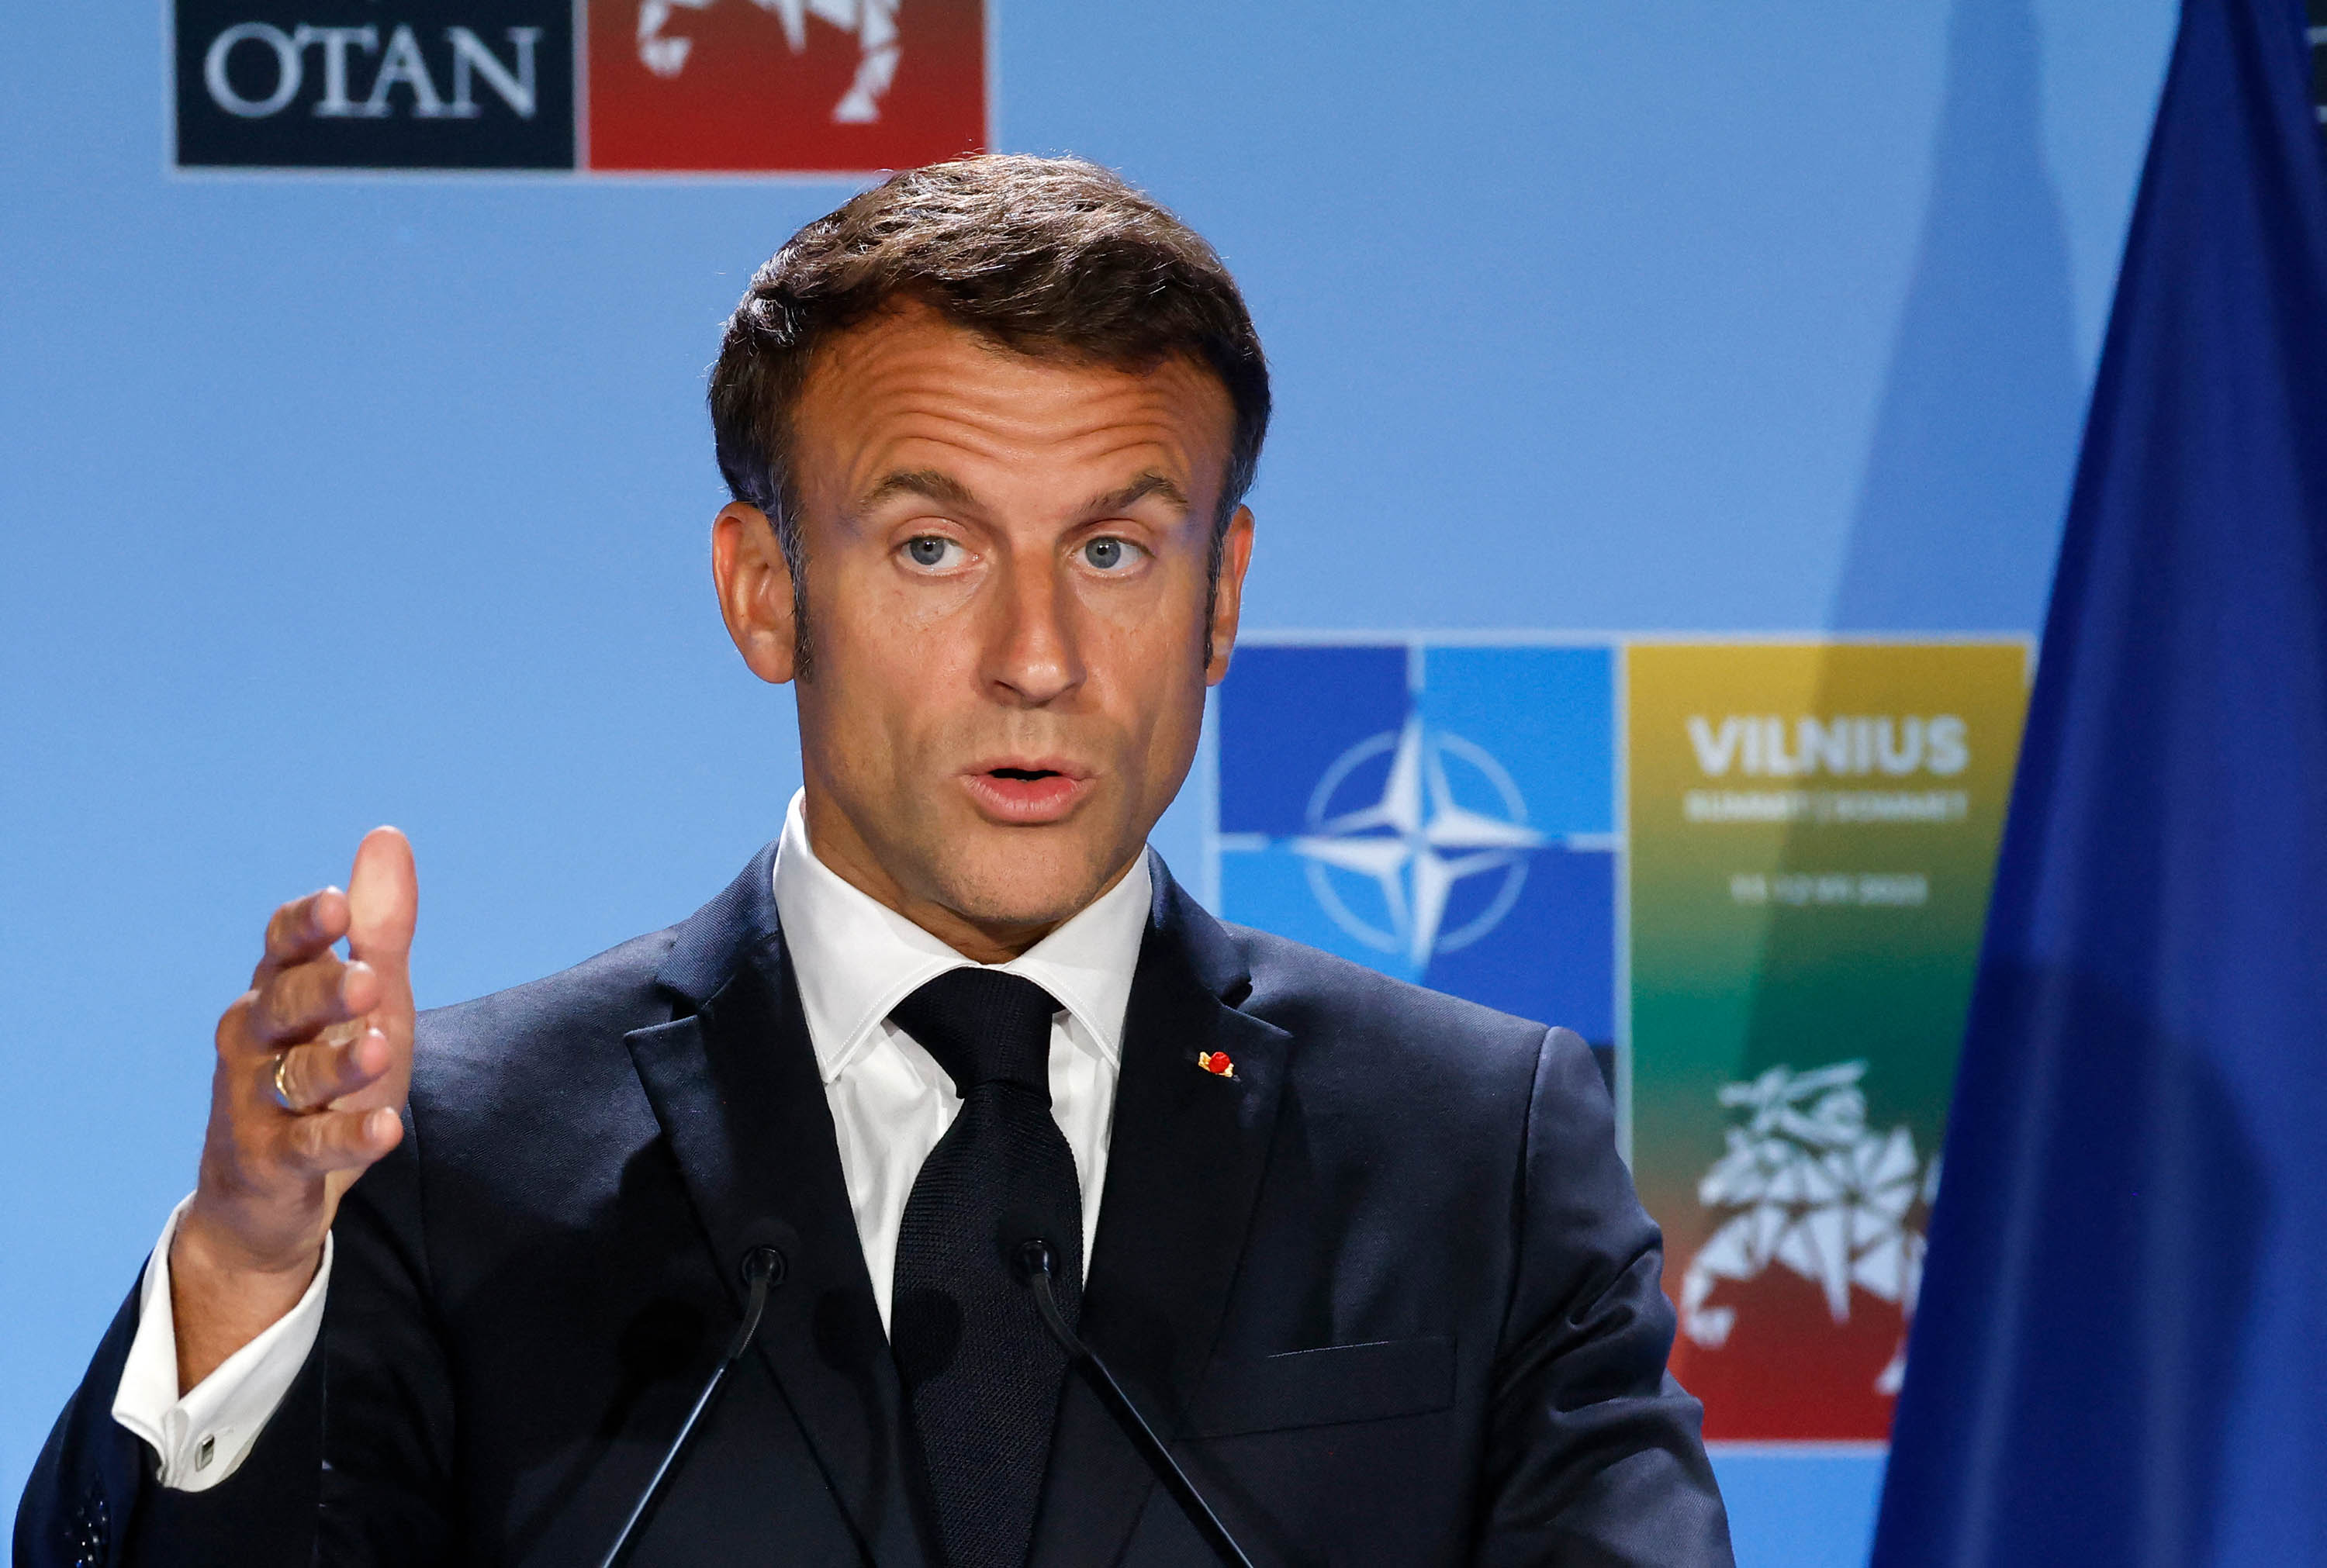 French President Emmanuel Macron speaks at a news conference during the NATO Summit in Vilnius, Lithuania, on July 12. 